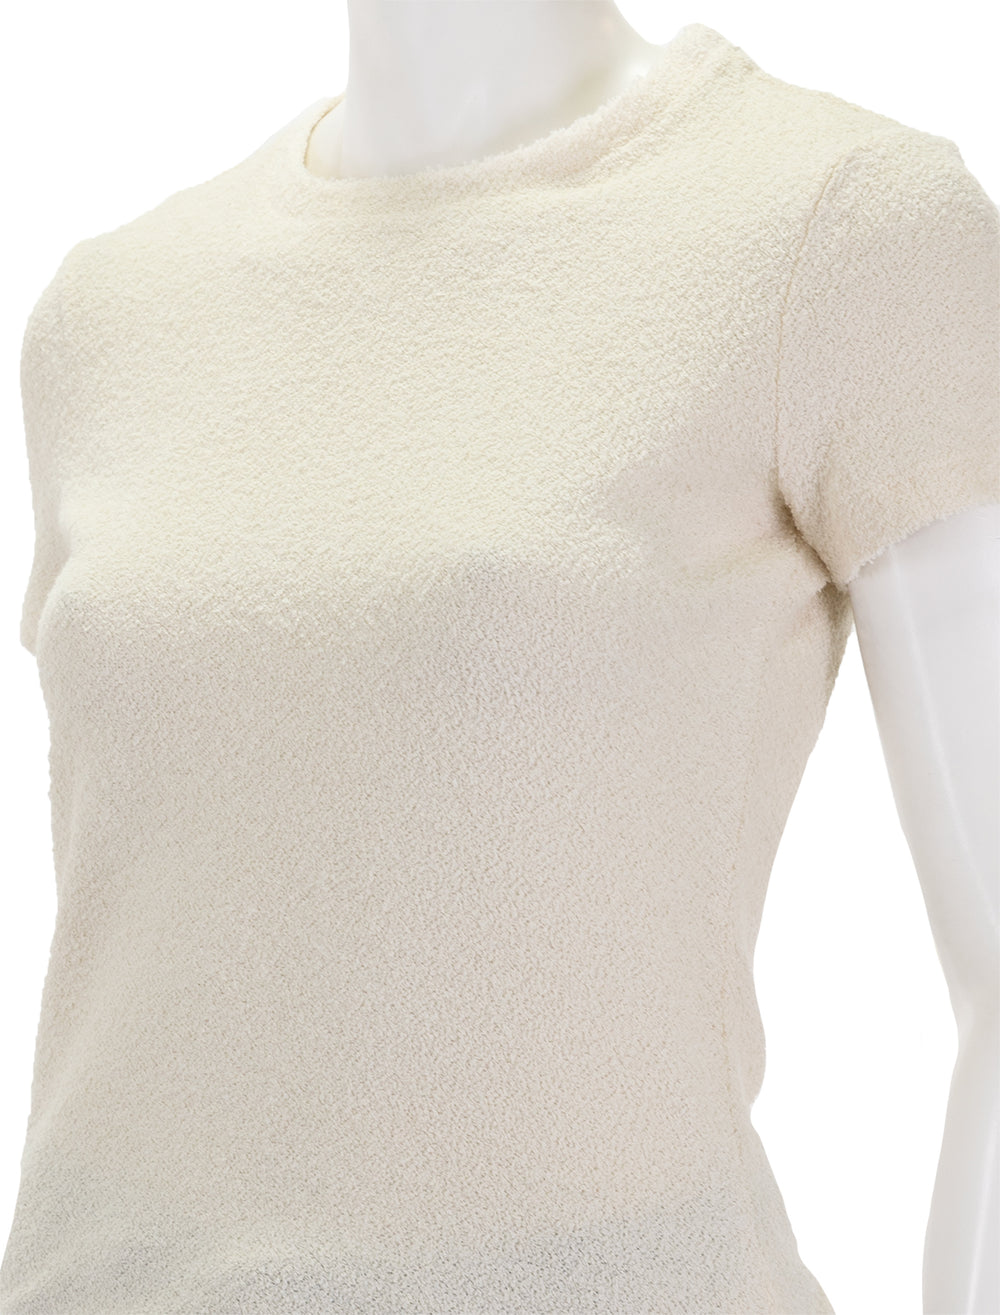 Close-up view of Theory's tiny tee in ivory boucle.